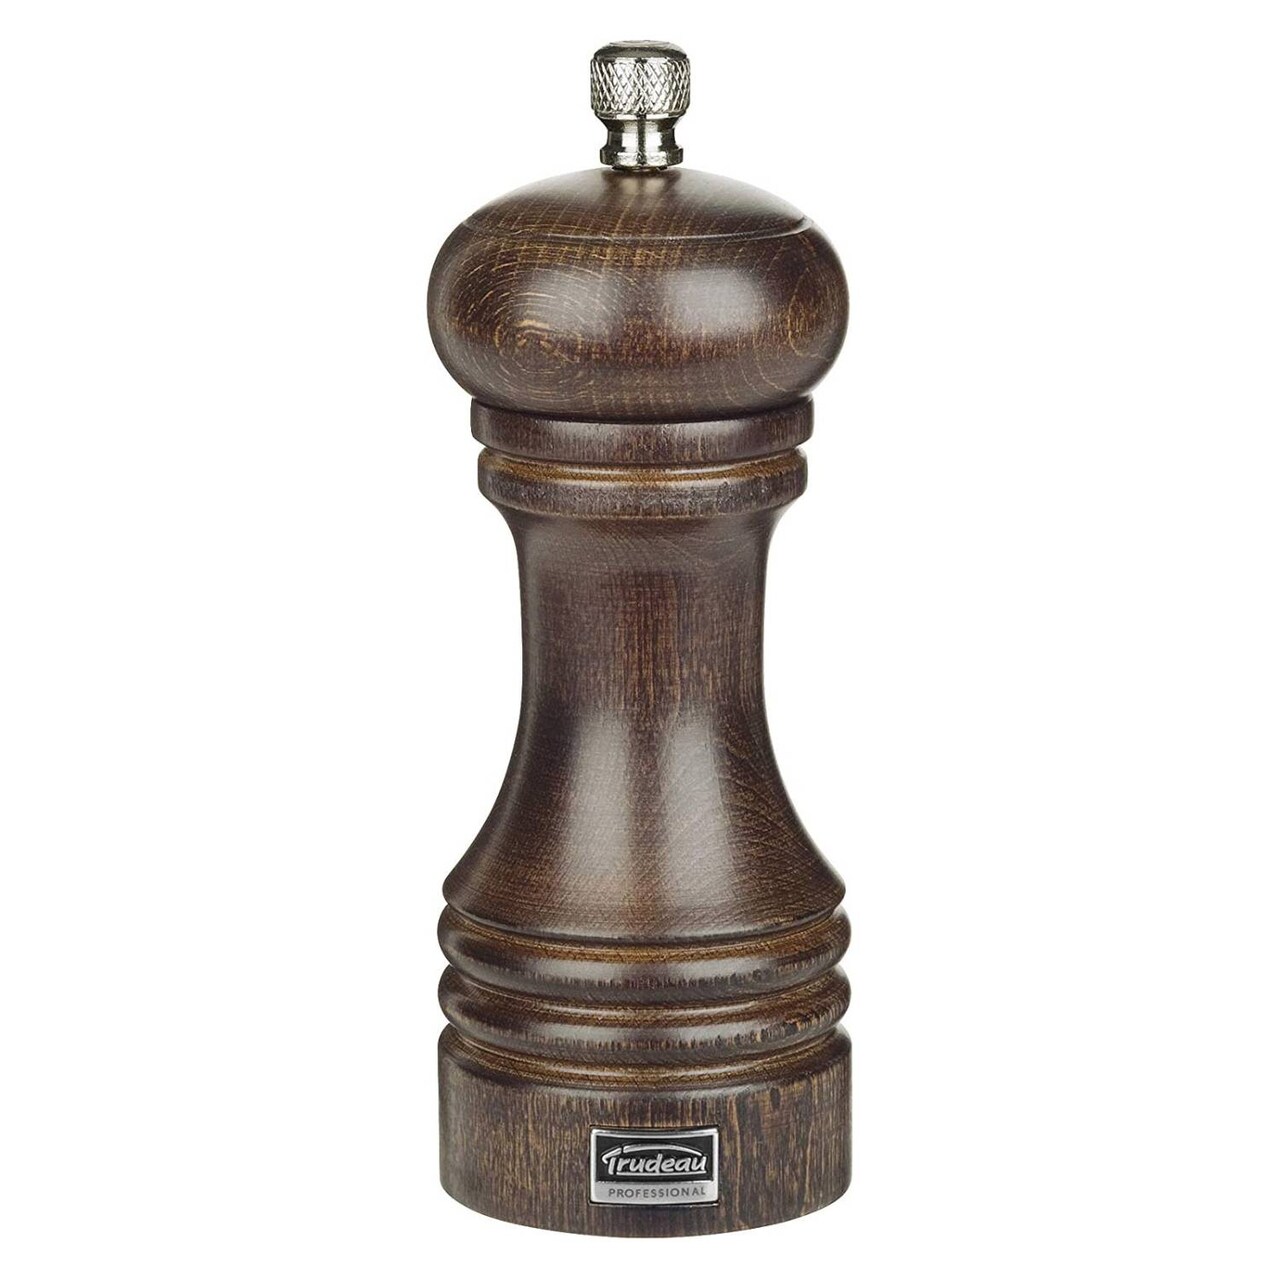 Trudeau Professional Wooden Adjustable Pepper Grinder Mill Fine and Coarse